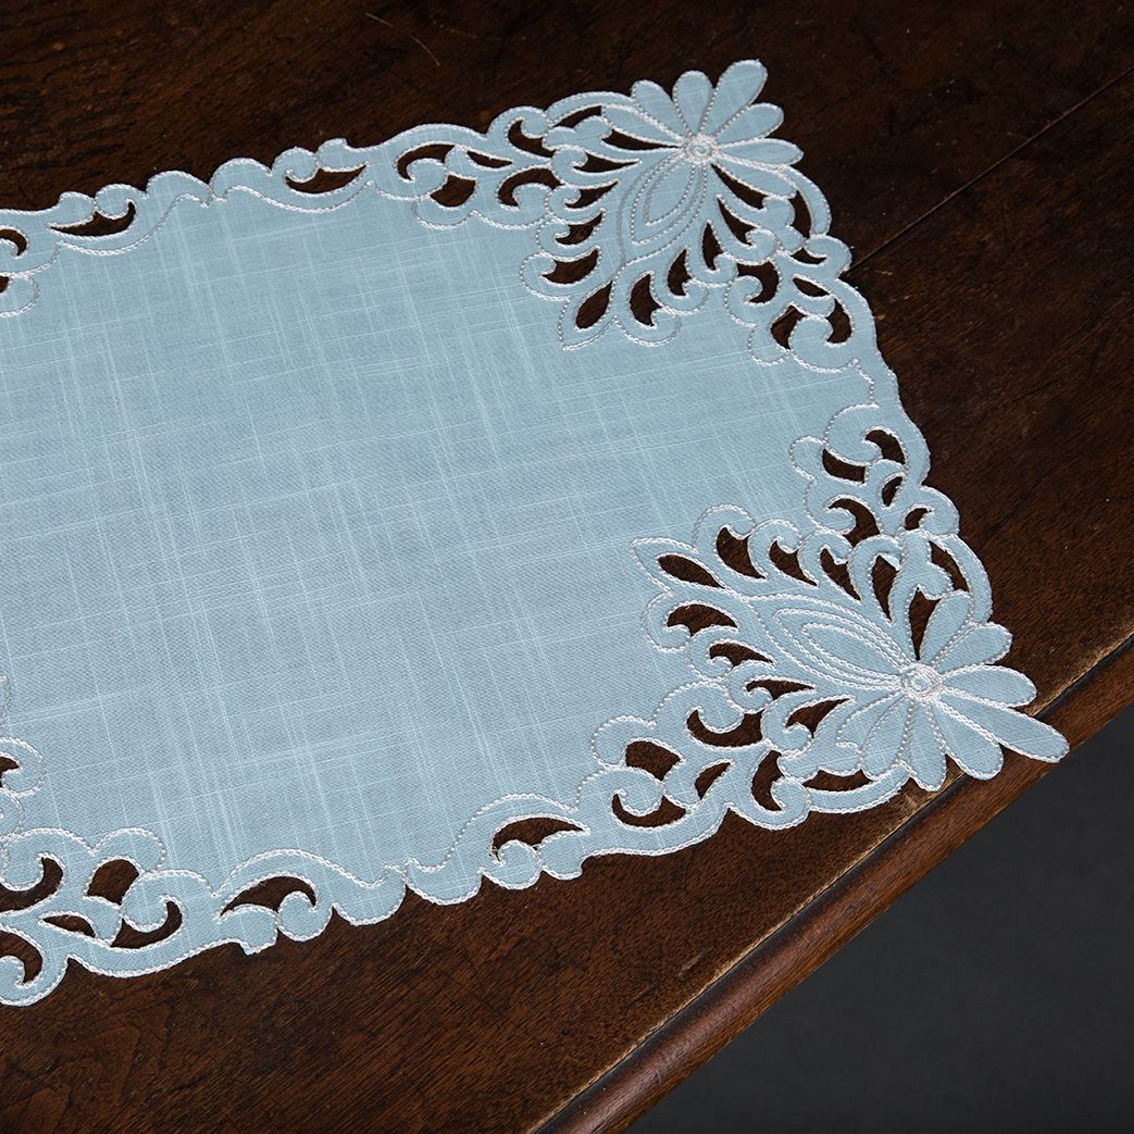 Manor Luxe, Wilshire Cutwork Placemats 14''X20'', Set of 4, Blue - Image 2 of 3